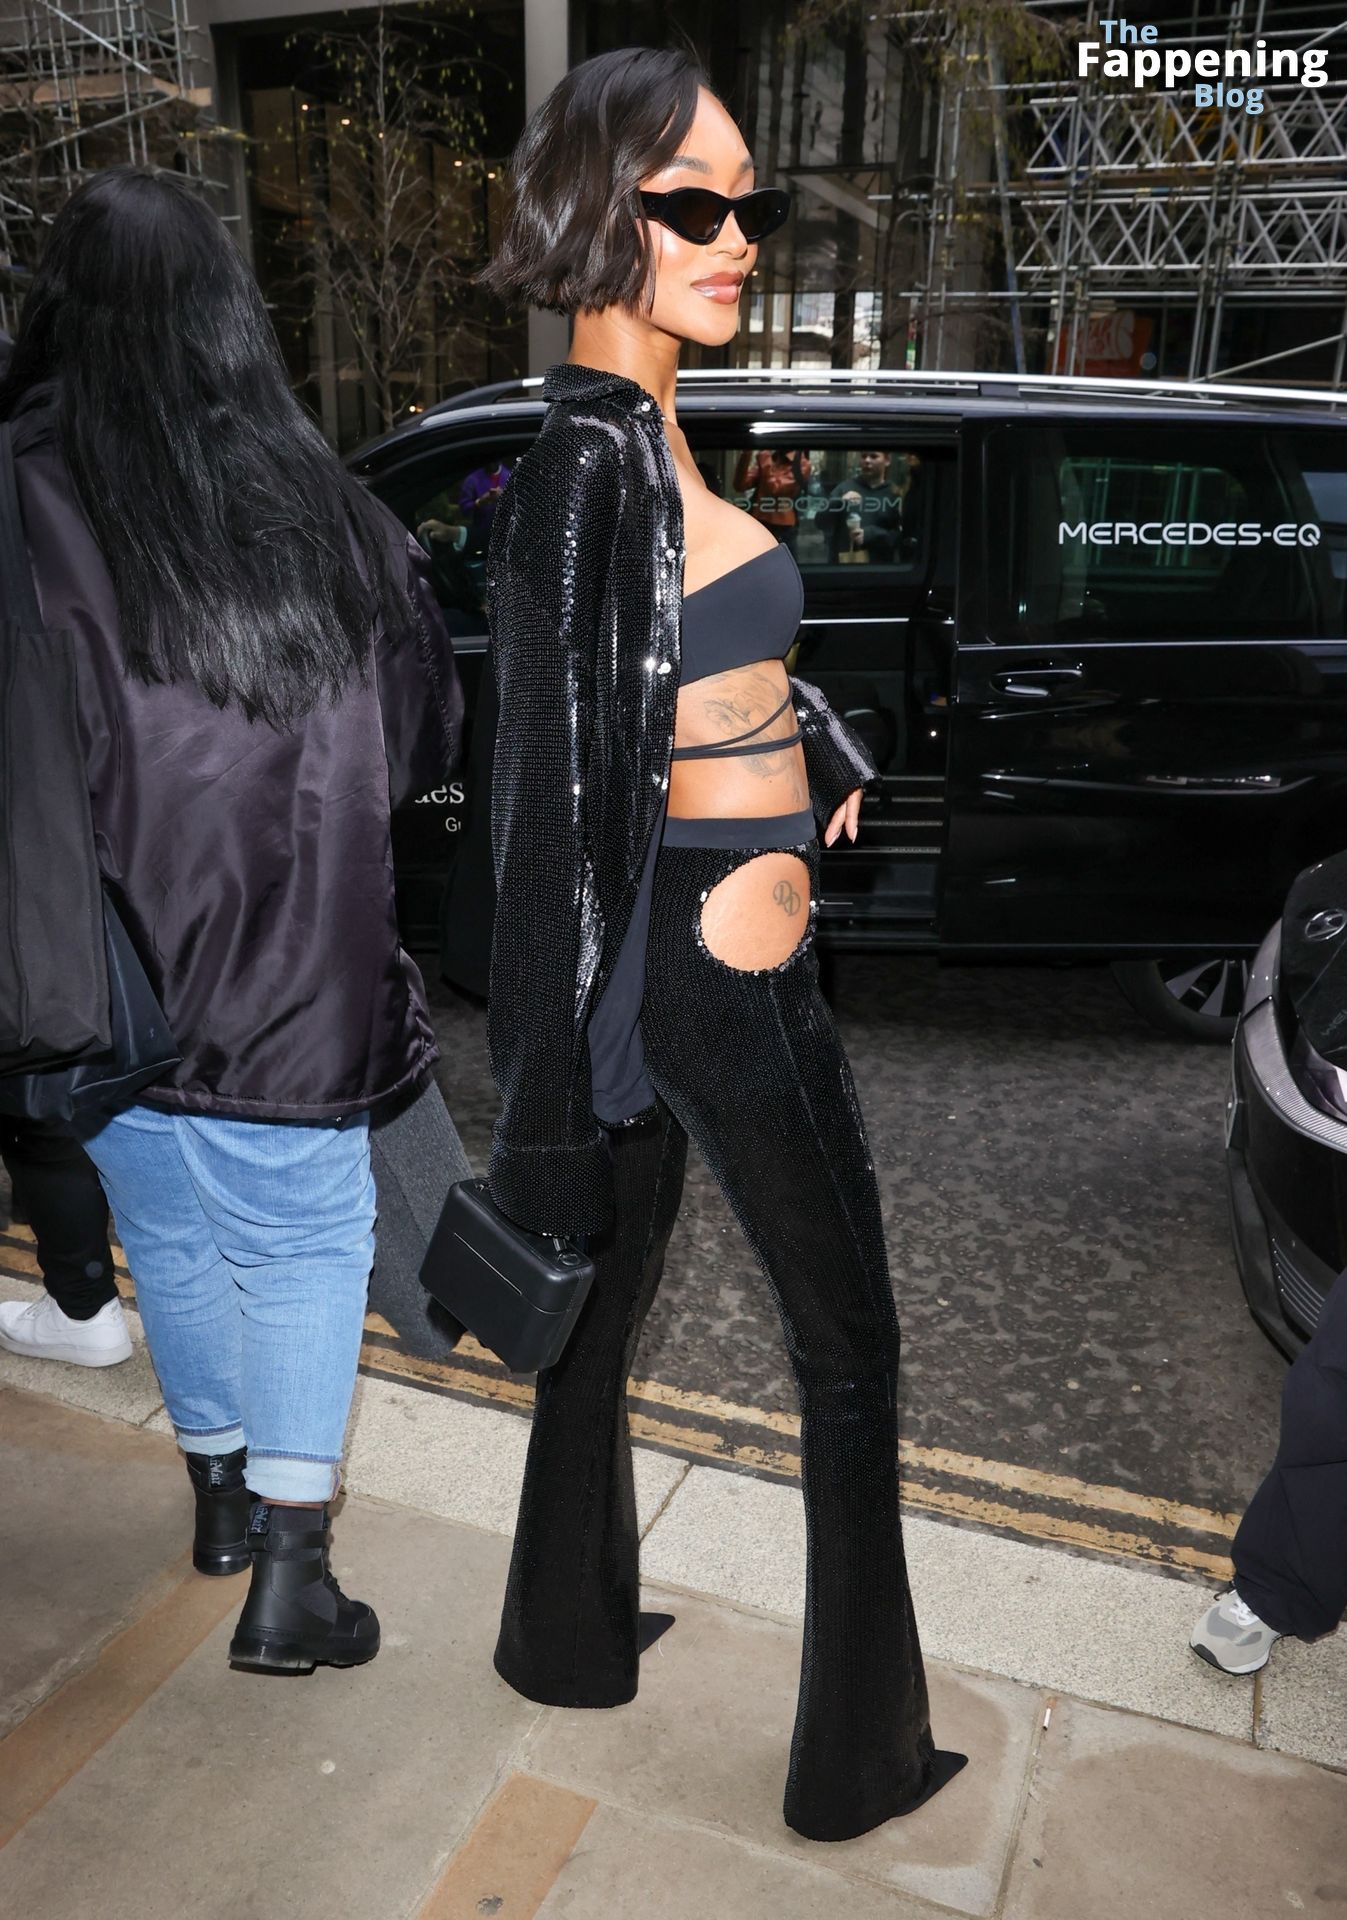 Jourdan Dunn is Photographed Outside the David Koma Show in London (39 Photos)